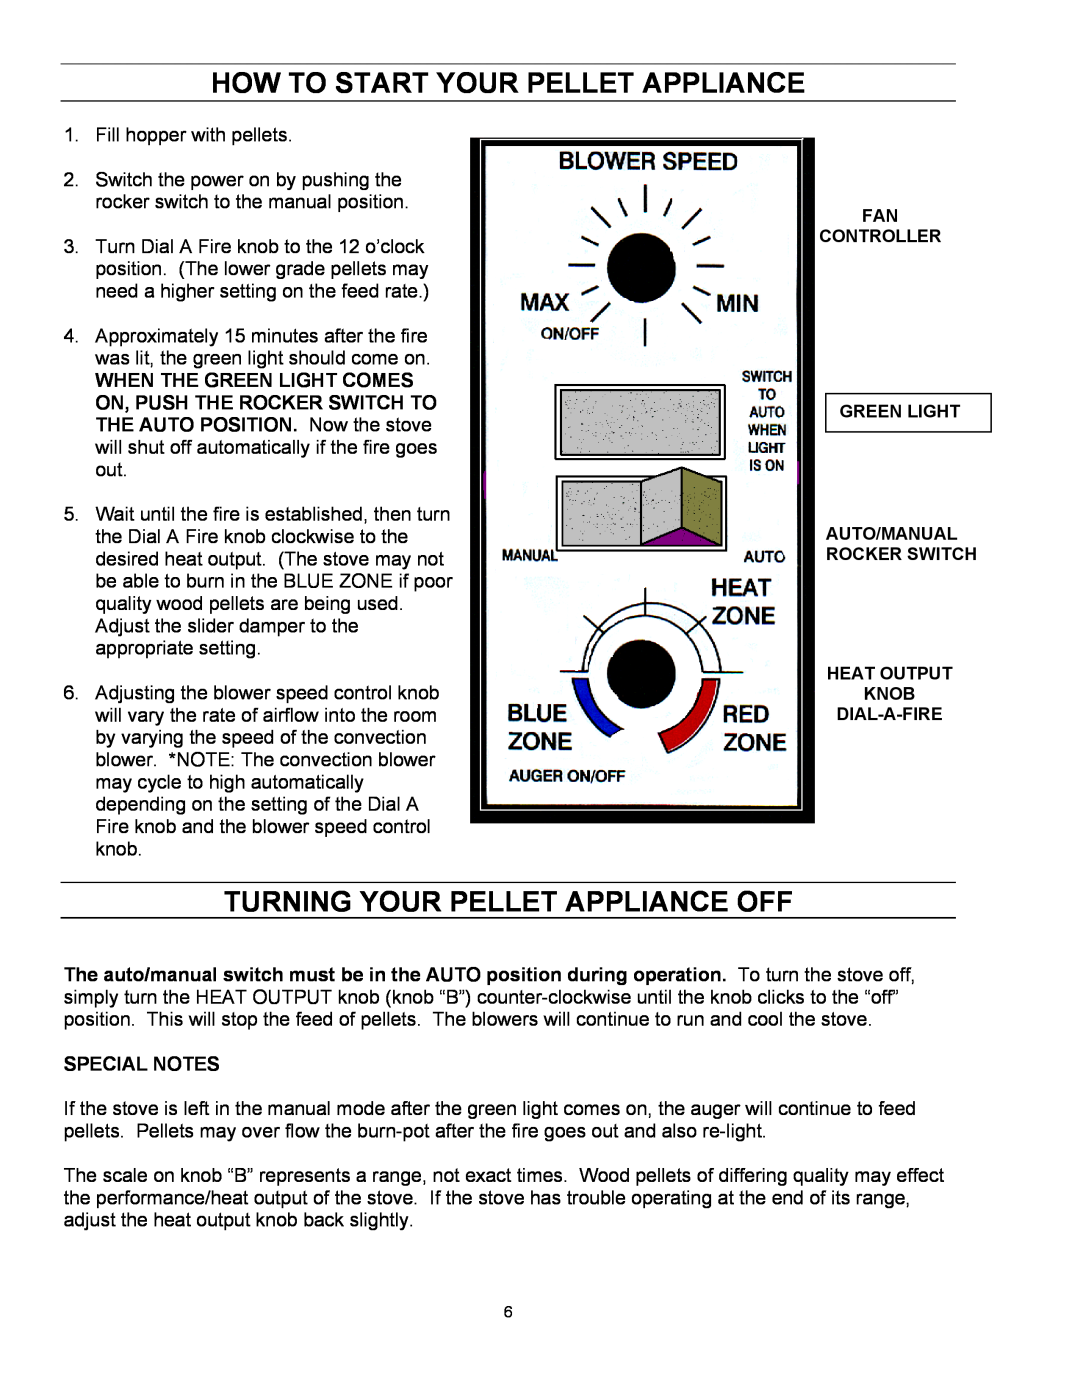 Enviro EF-II I technical manual How To Start Your Pellet Appliance, Turning Your Pellet Appliance Off, Special Notes 